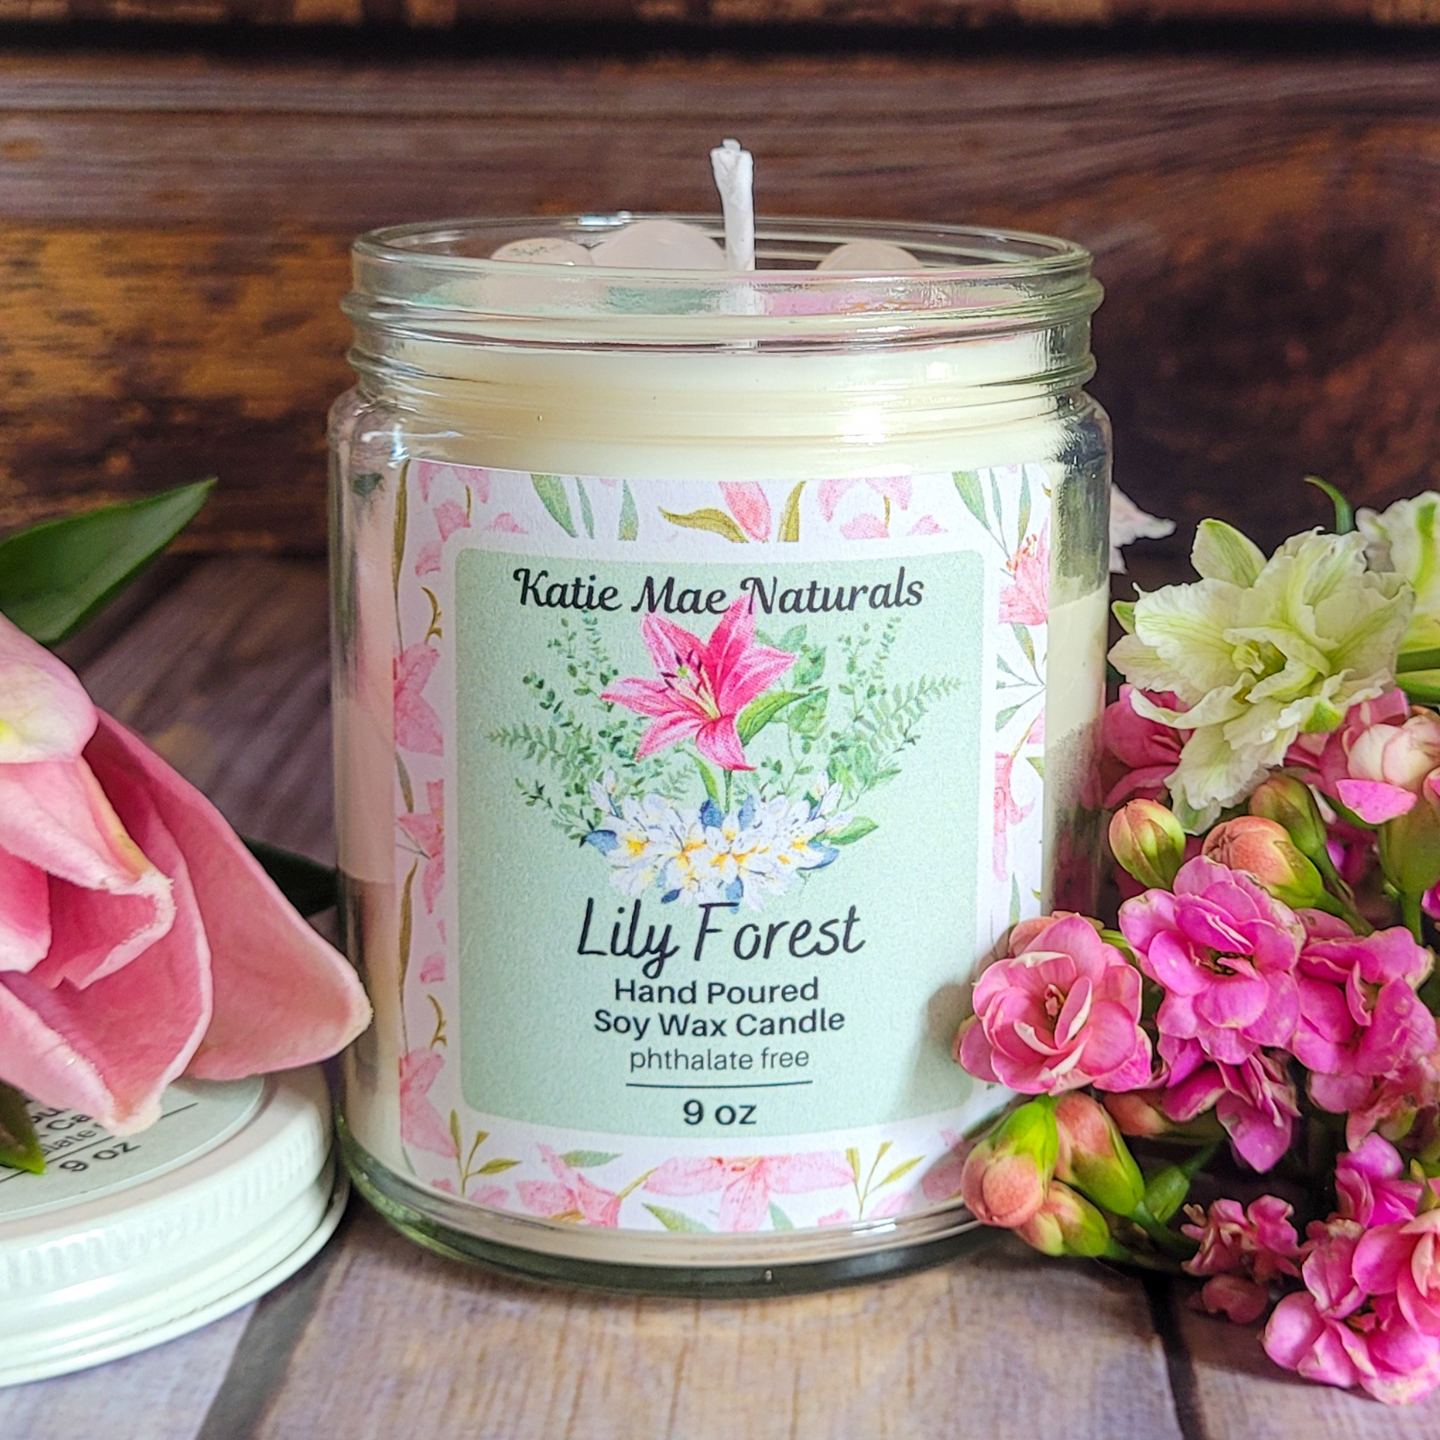 Lily Forest Soy Wax Candle - 9 oz